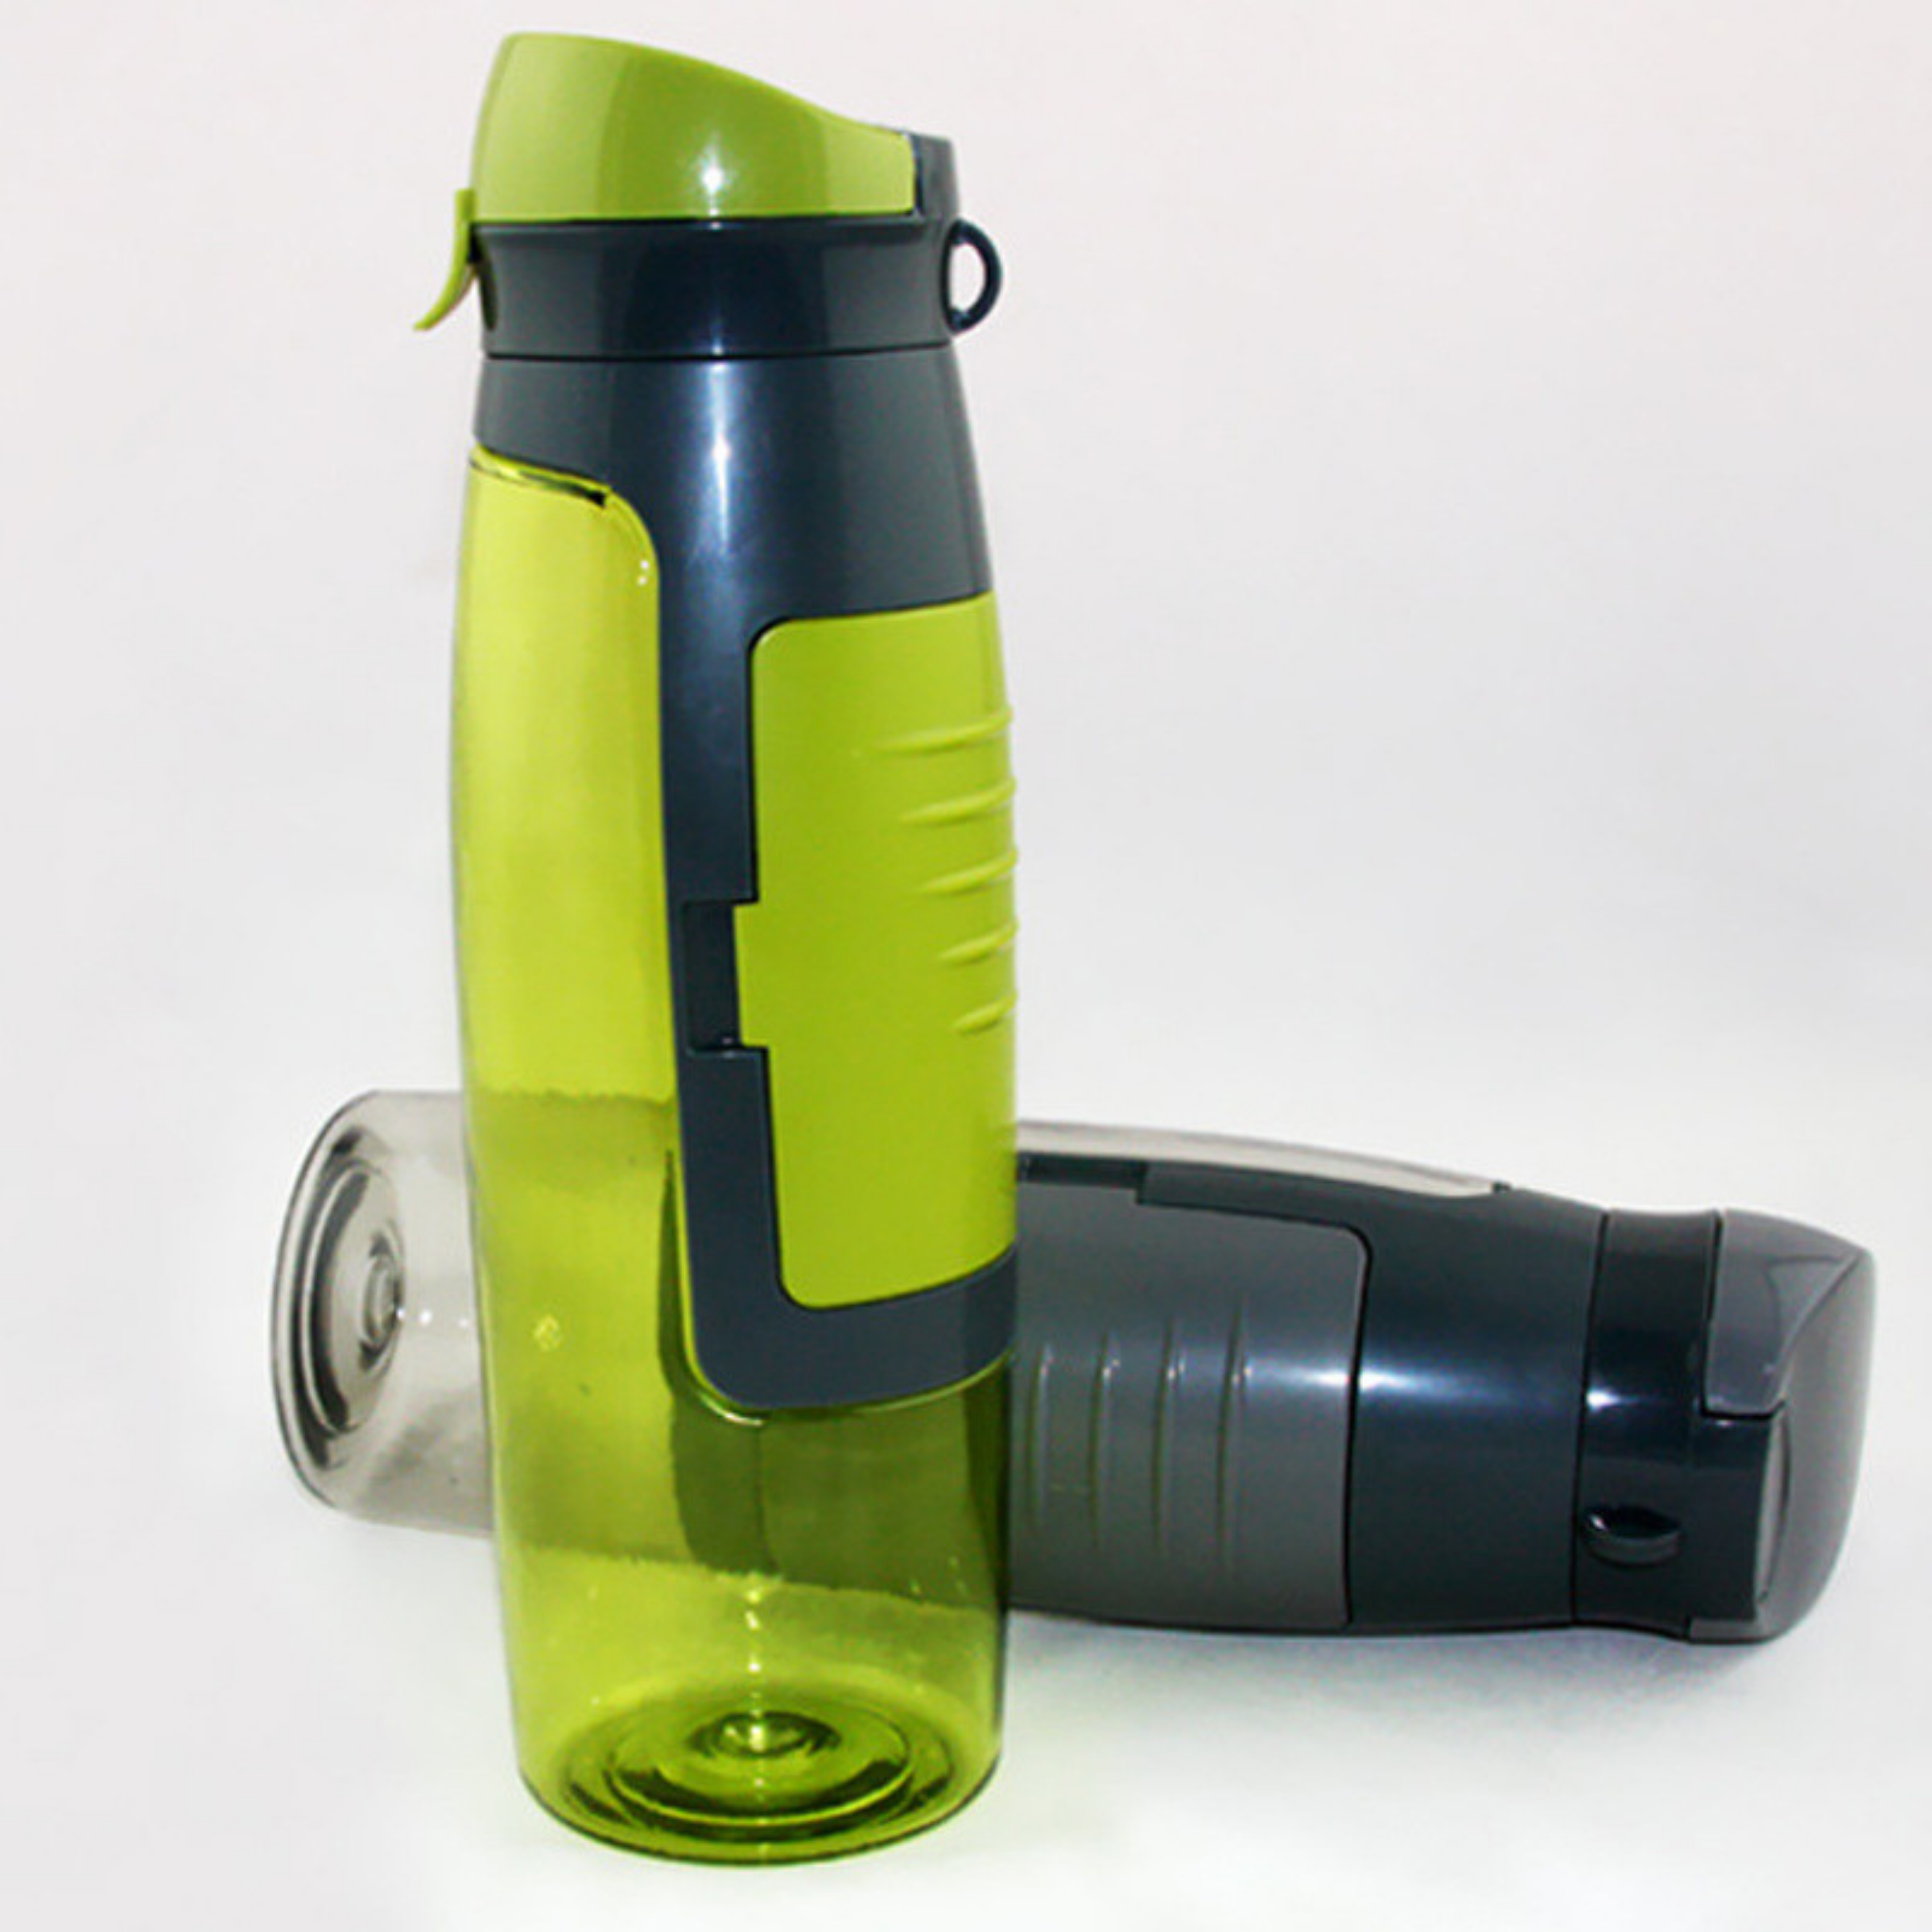 Water Bottle Hidden Diversion with Secret Security Container